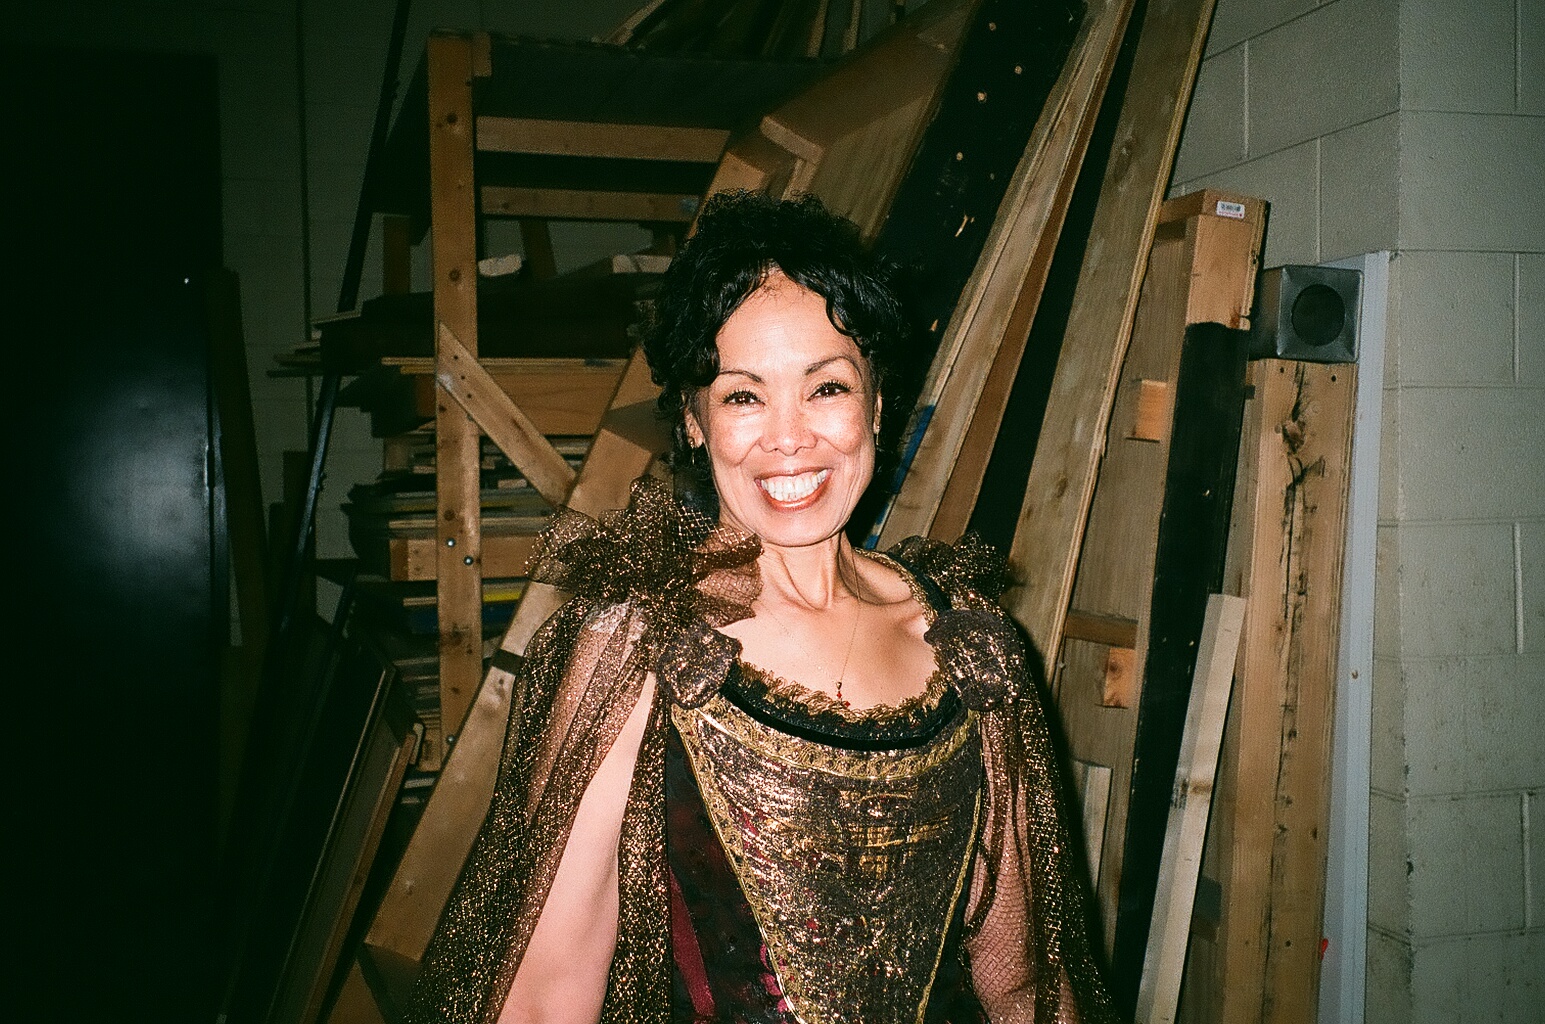 Backstage at the Opera House in Detroit as Don Giovanni's Maid.